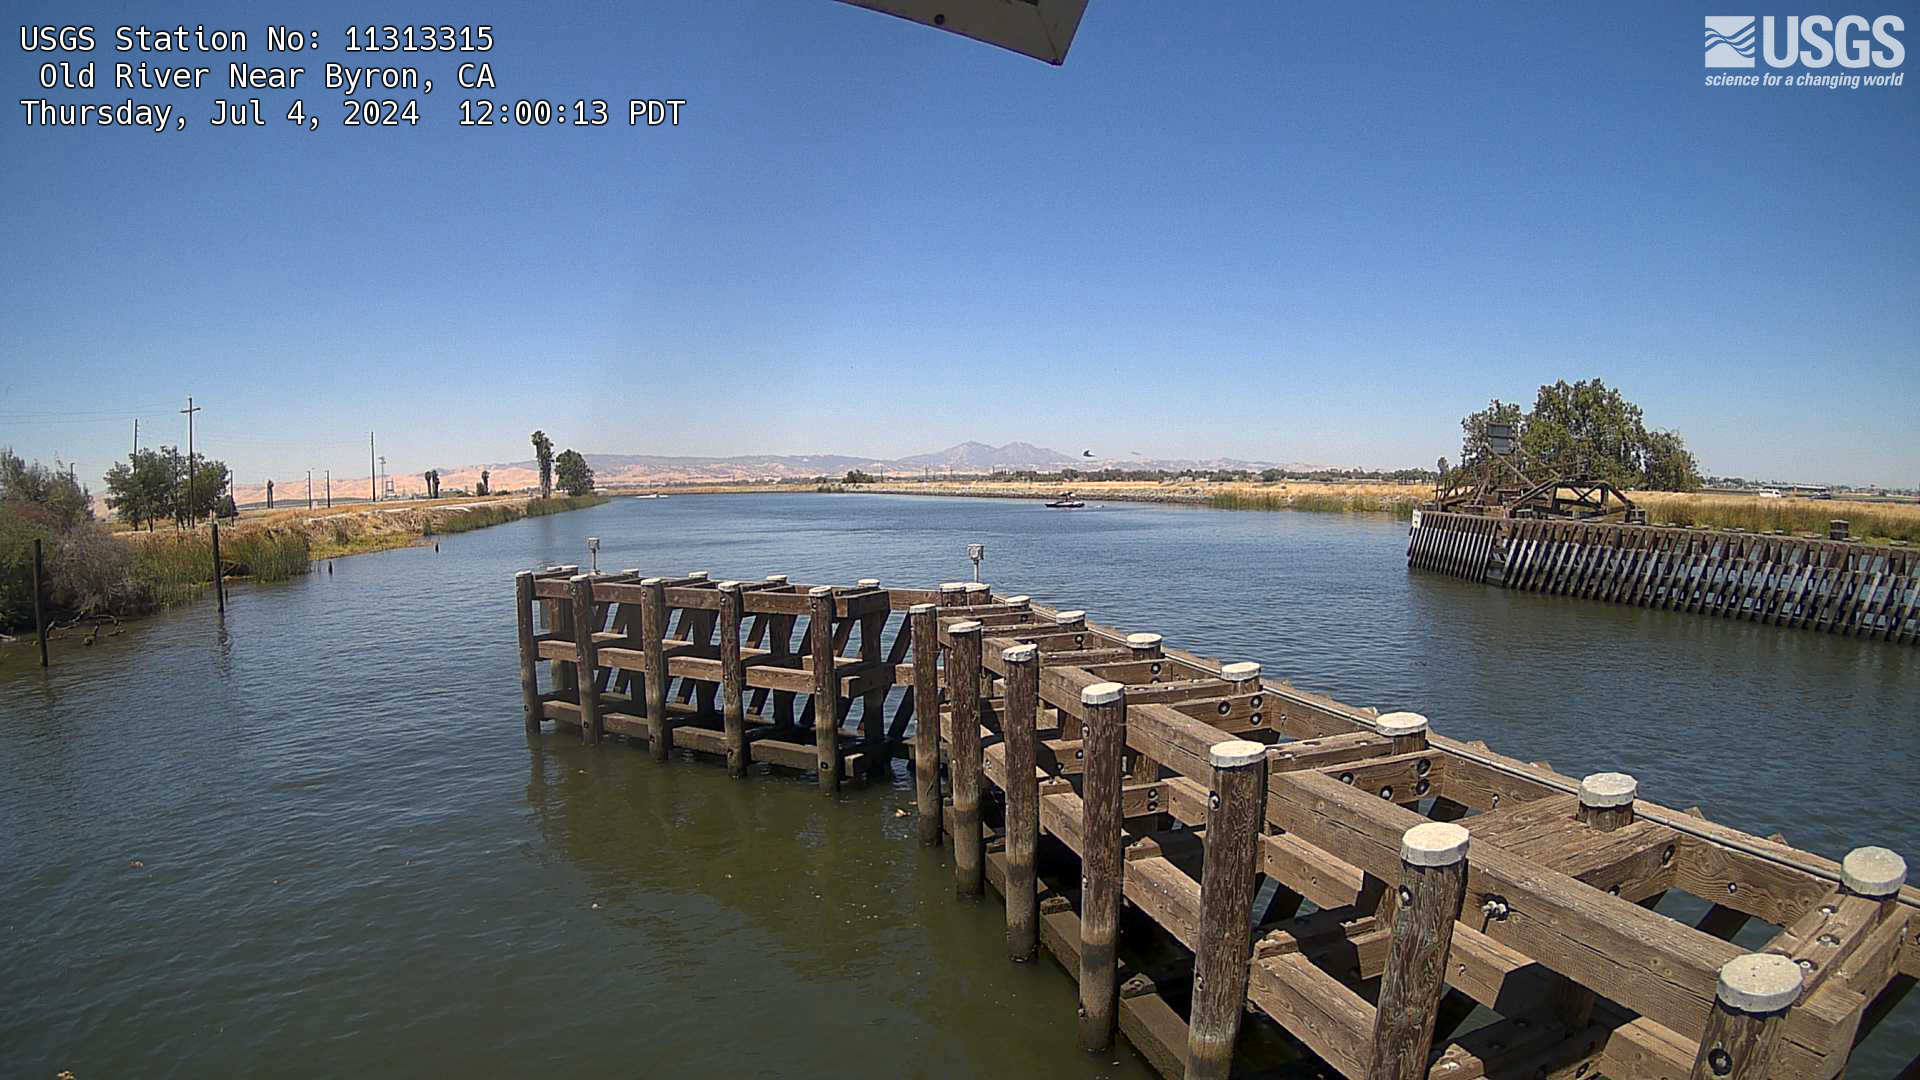 This is the most recent camera image of Old River Near Byron webcam.